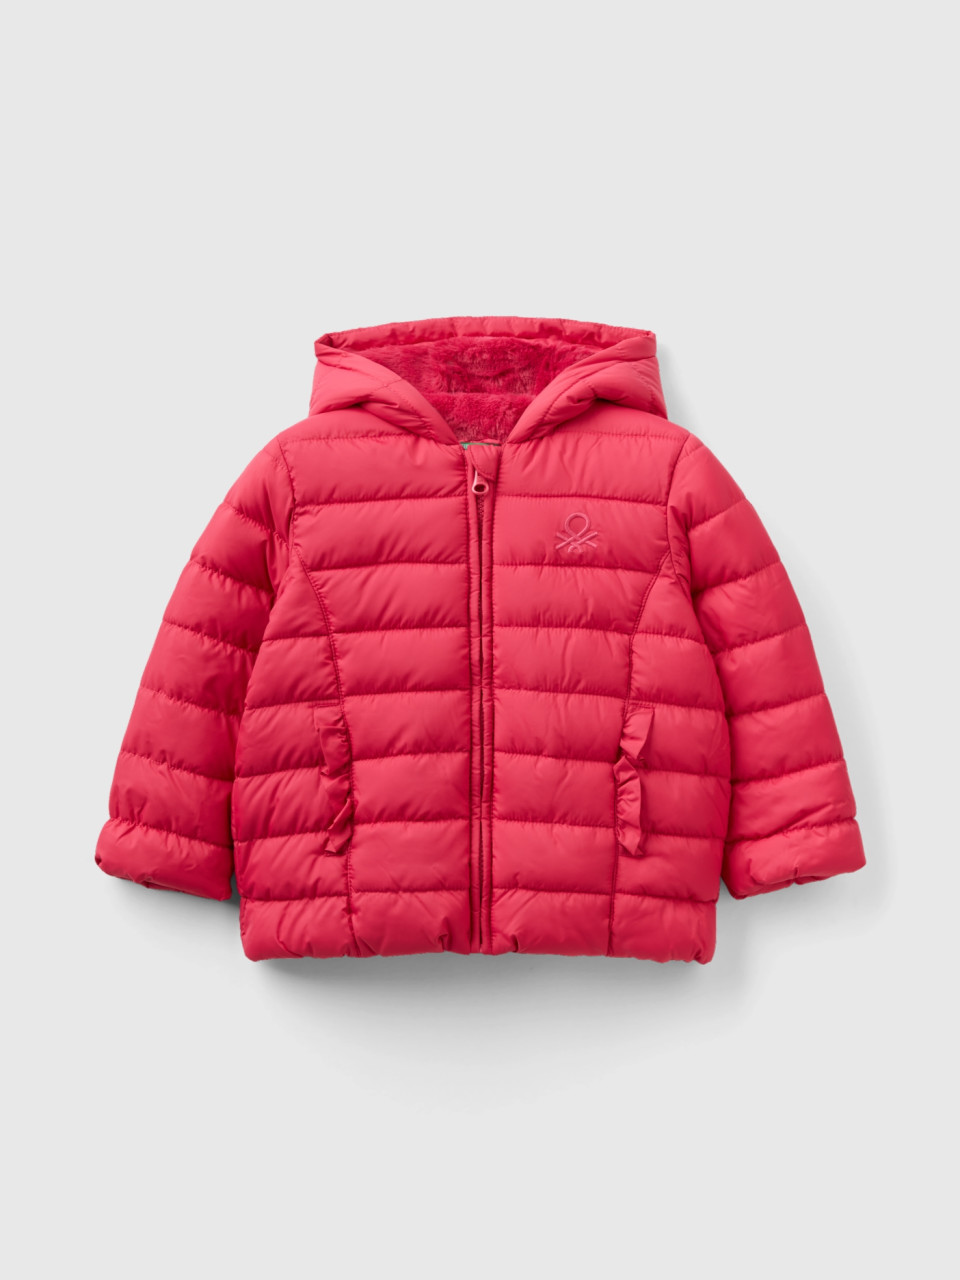 Benetton, Padded Jacket With Rouches, Cyclamen, Kids